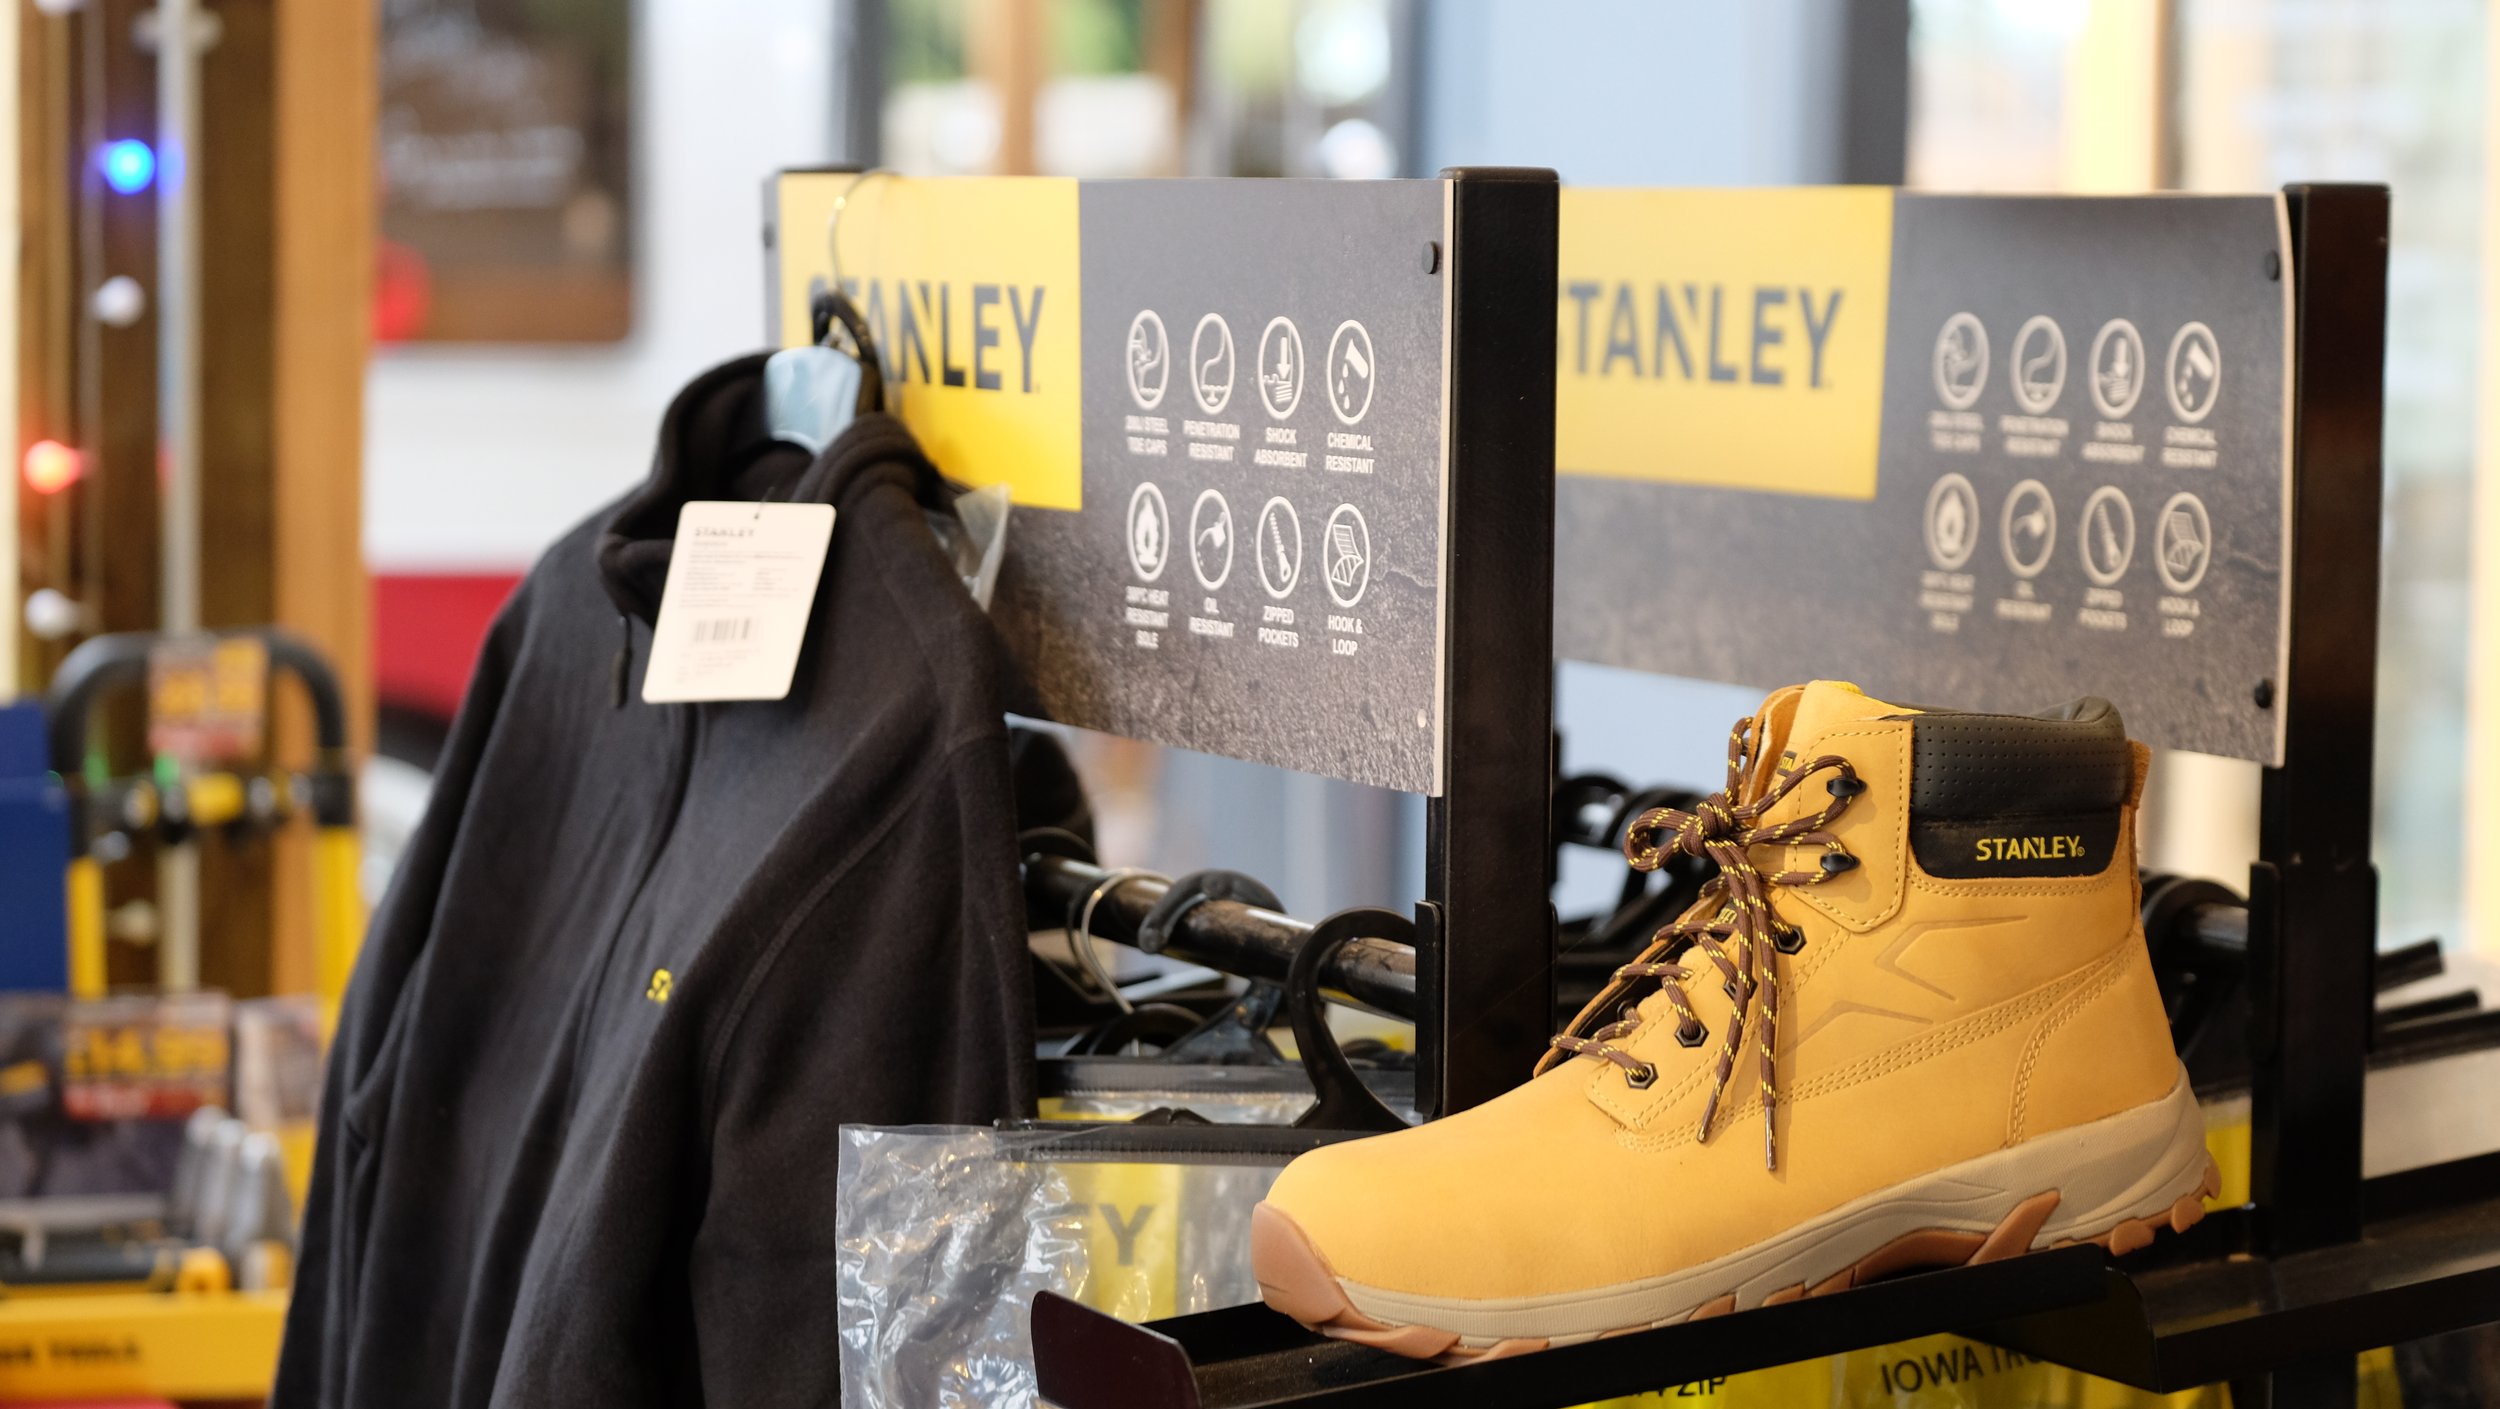  Stanley workwear and PPE supplier in Barton, Cambridge. 